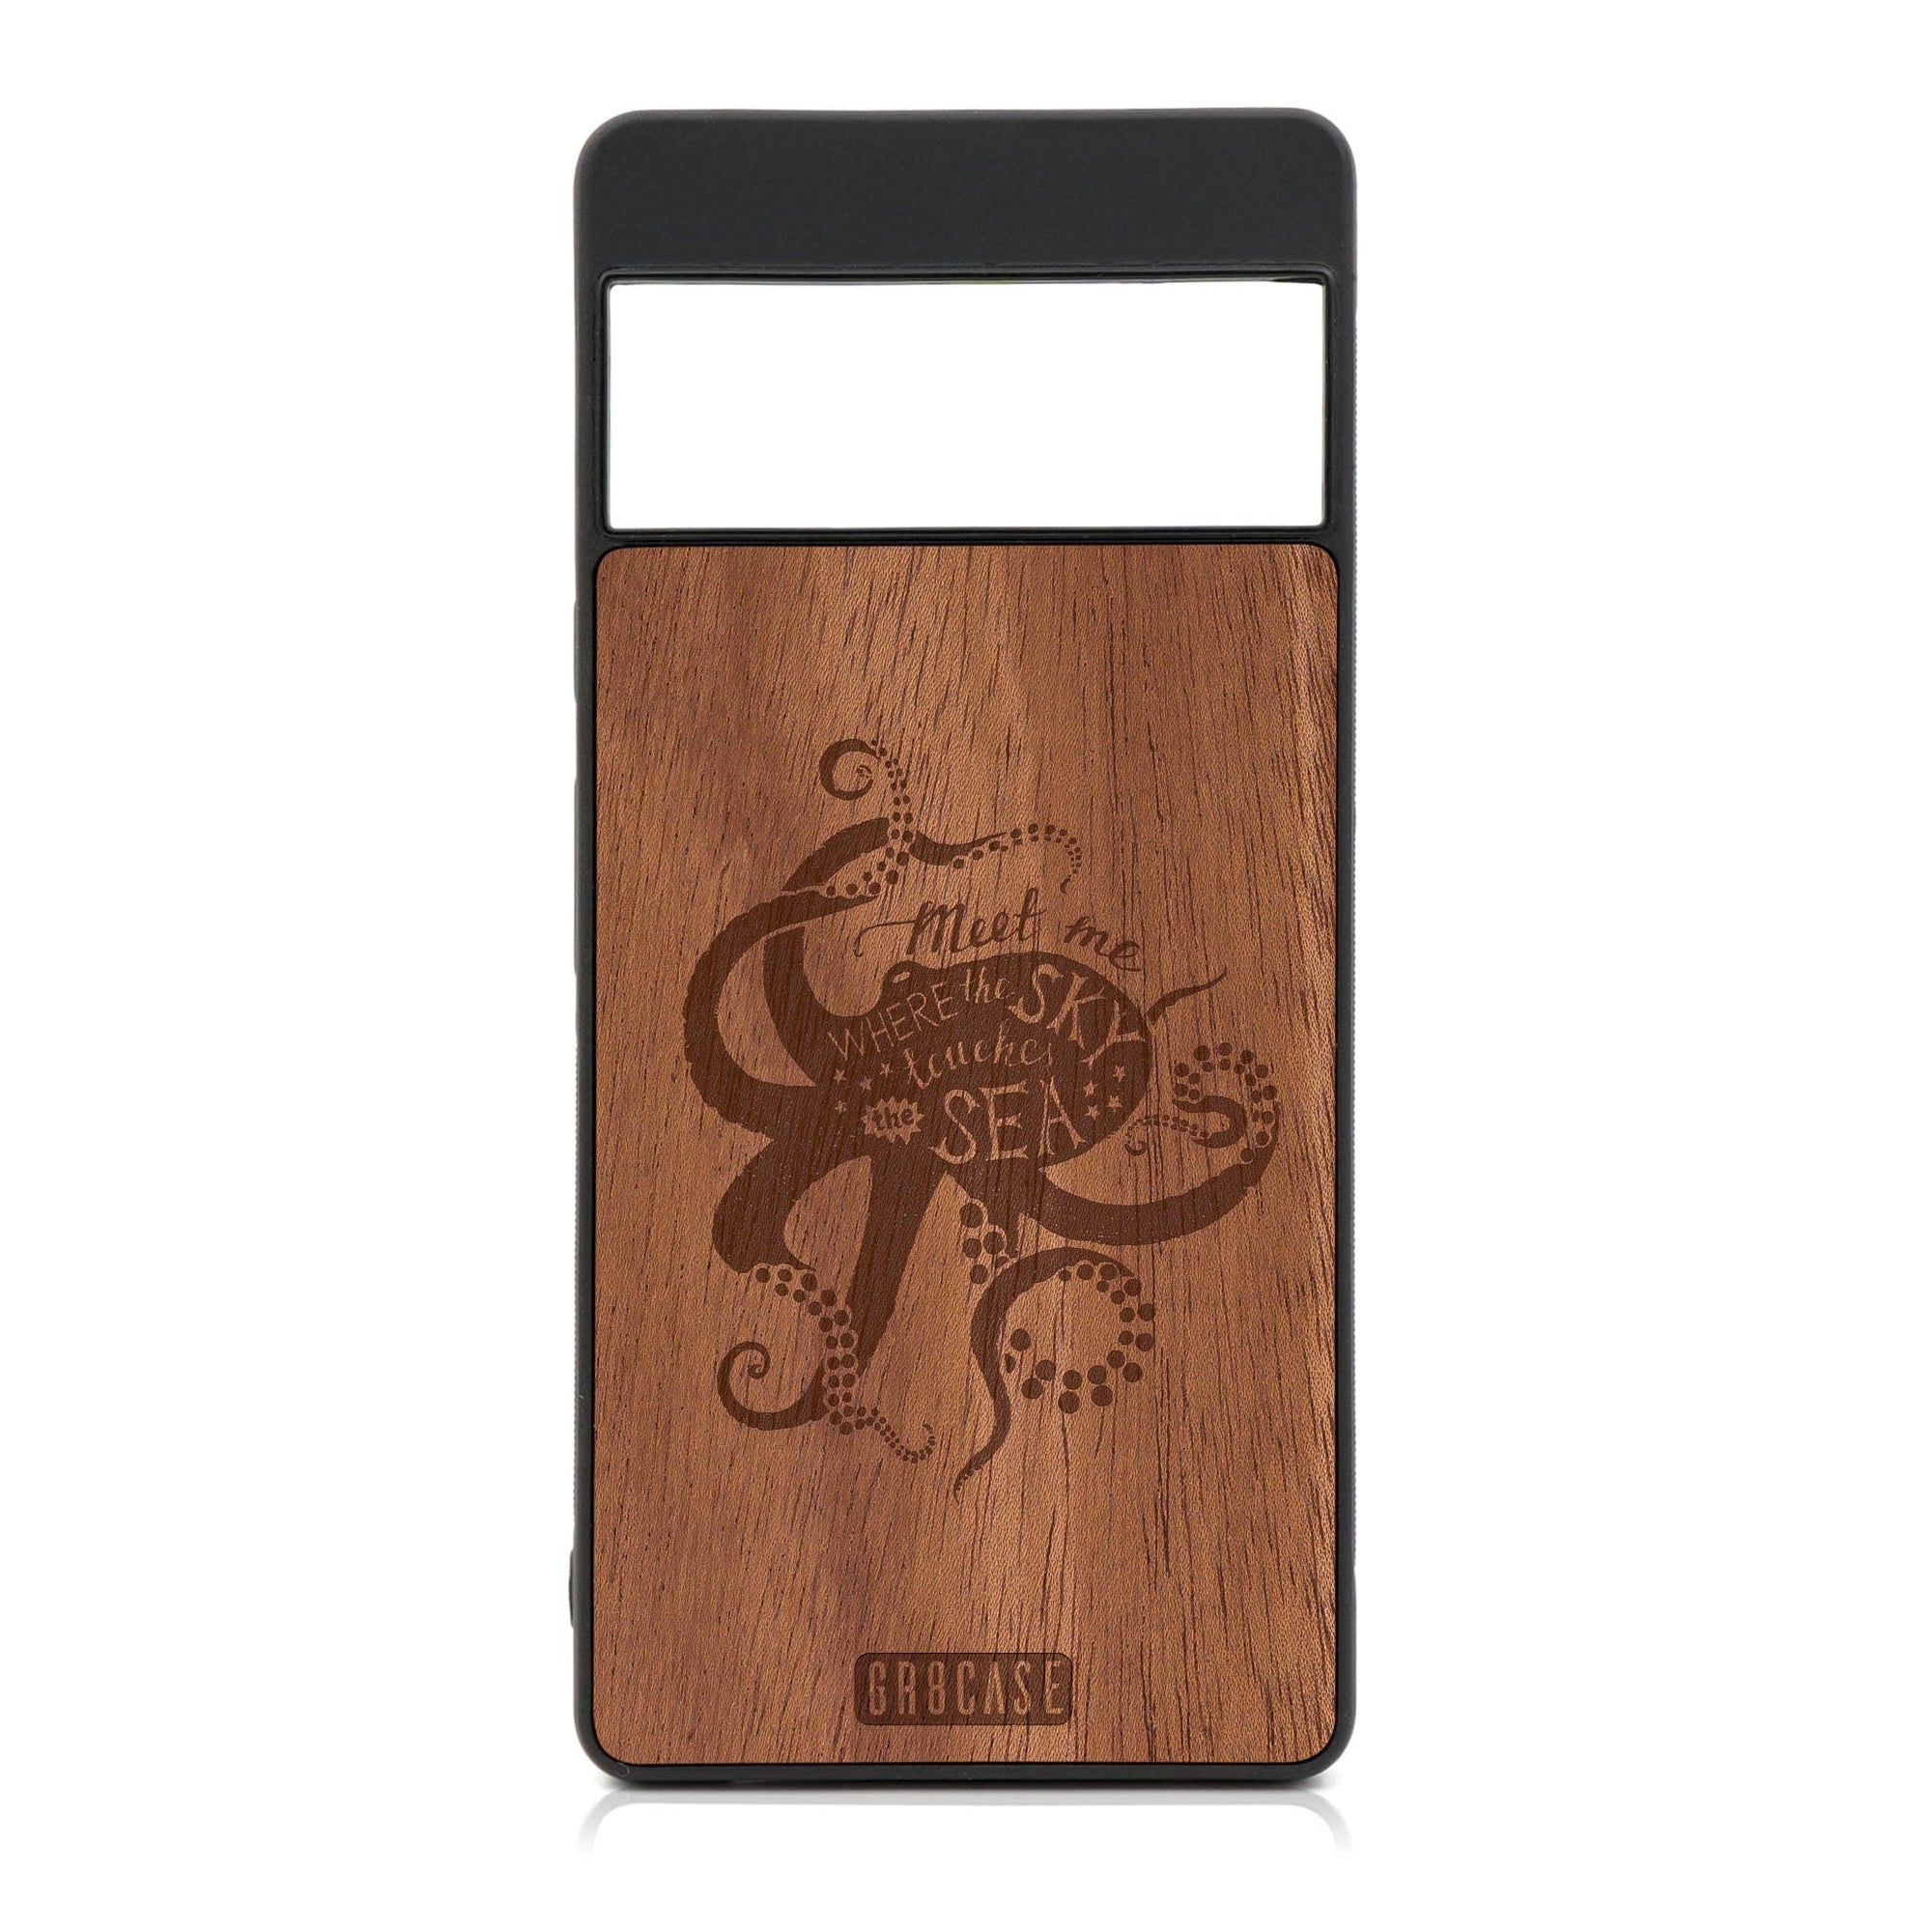 Meet Me Where The Sky Touches The Sea (Octopus) Design Wood Case For Google Pixel 7